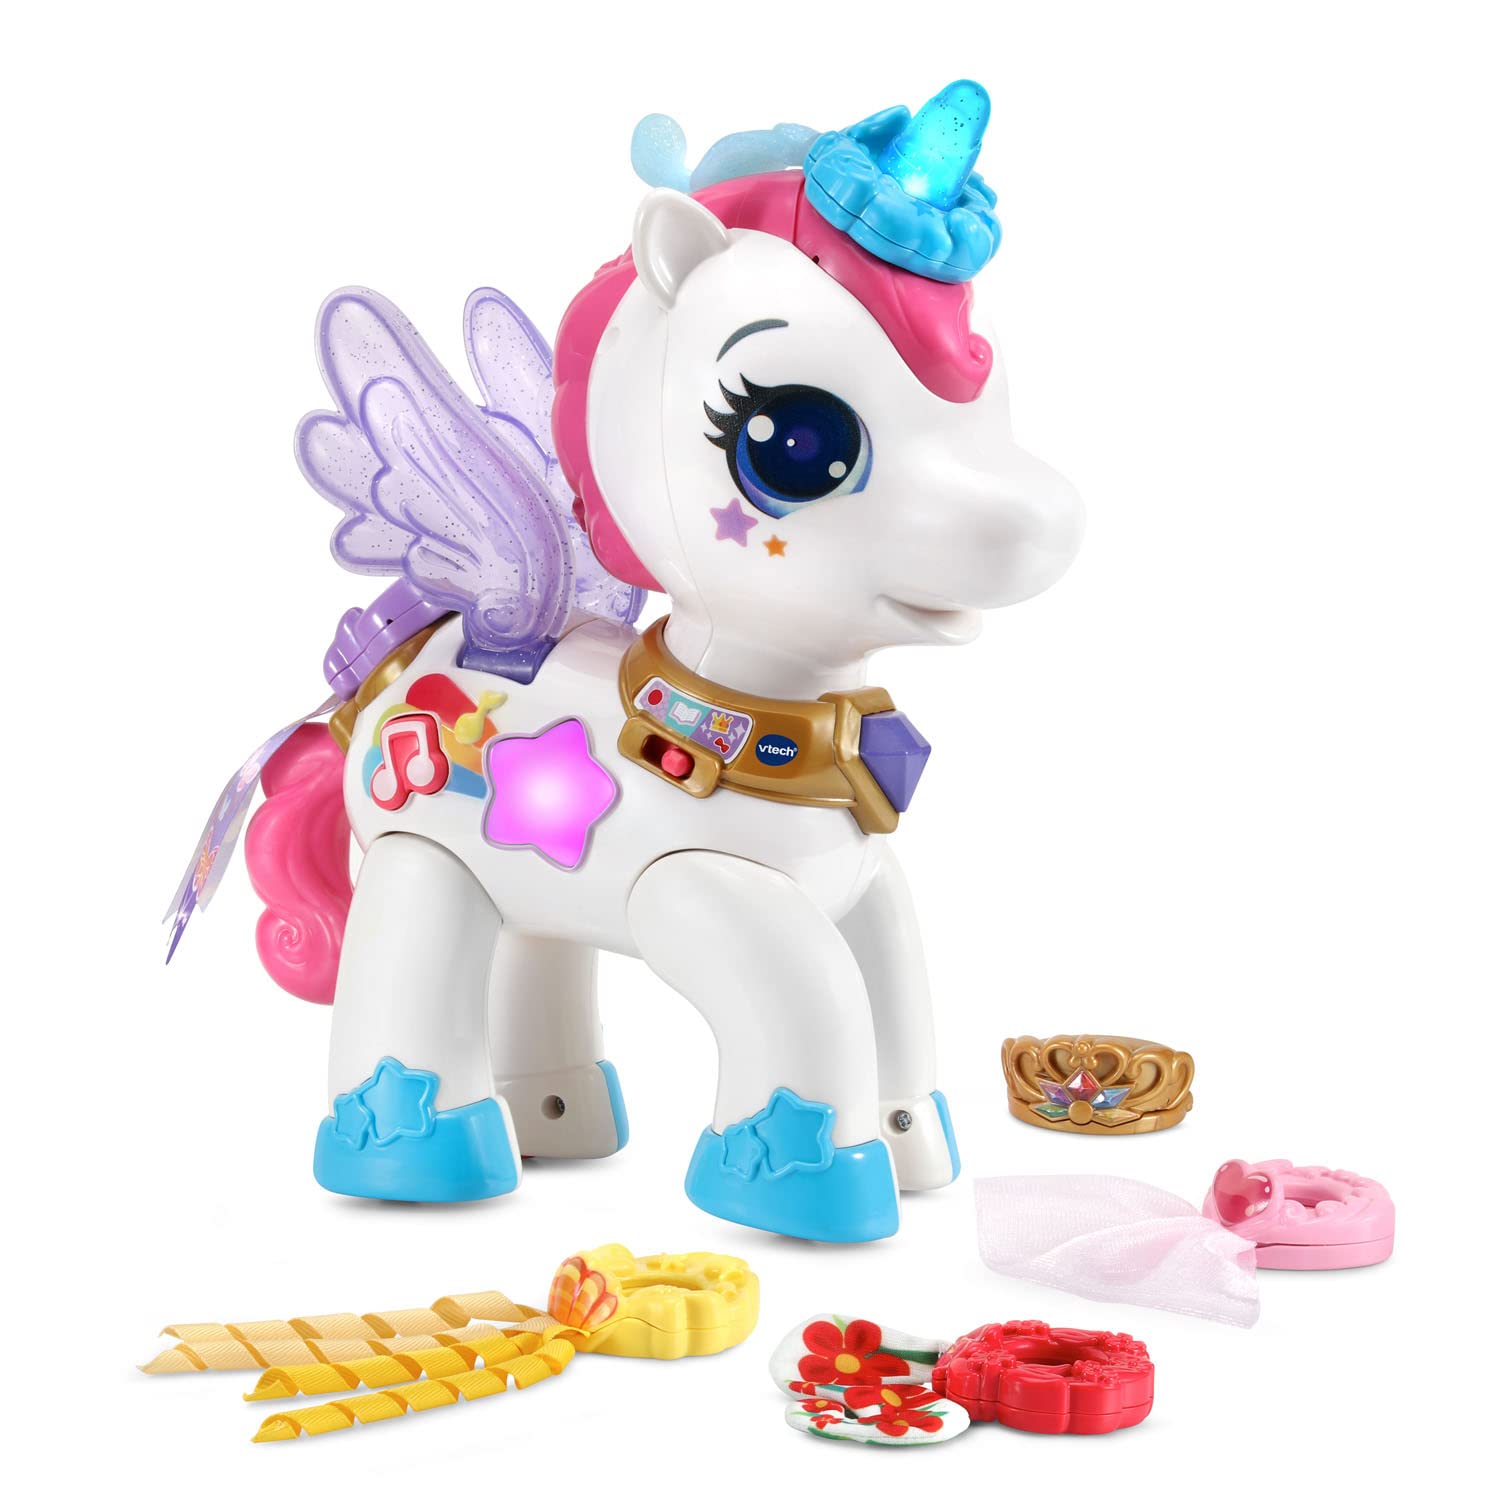 VTech Style & Glam On Unicorn w/ Six Colorful Accessories $7.49 + Shipping is Free w/ Target Red Card or $35+ orders